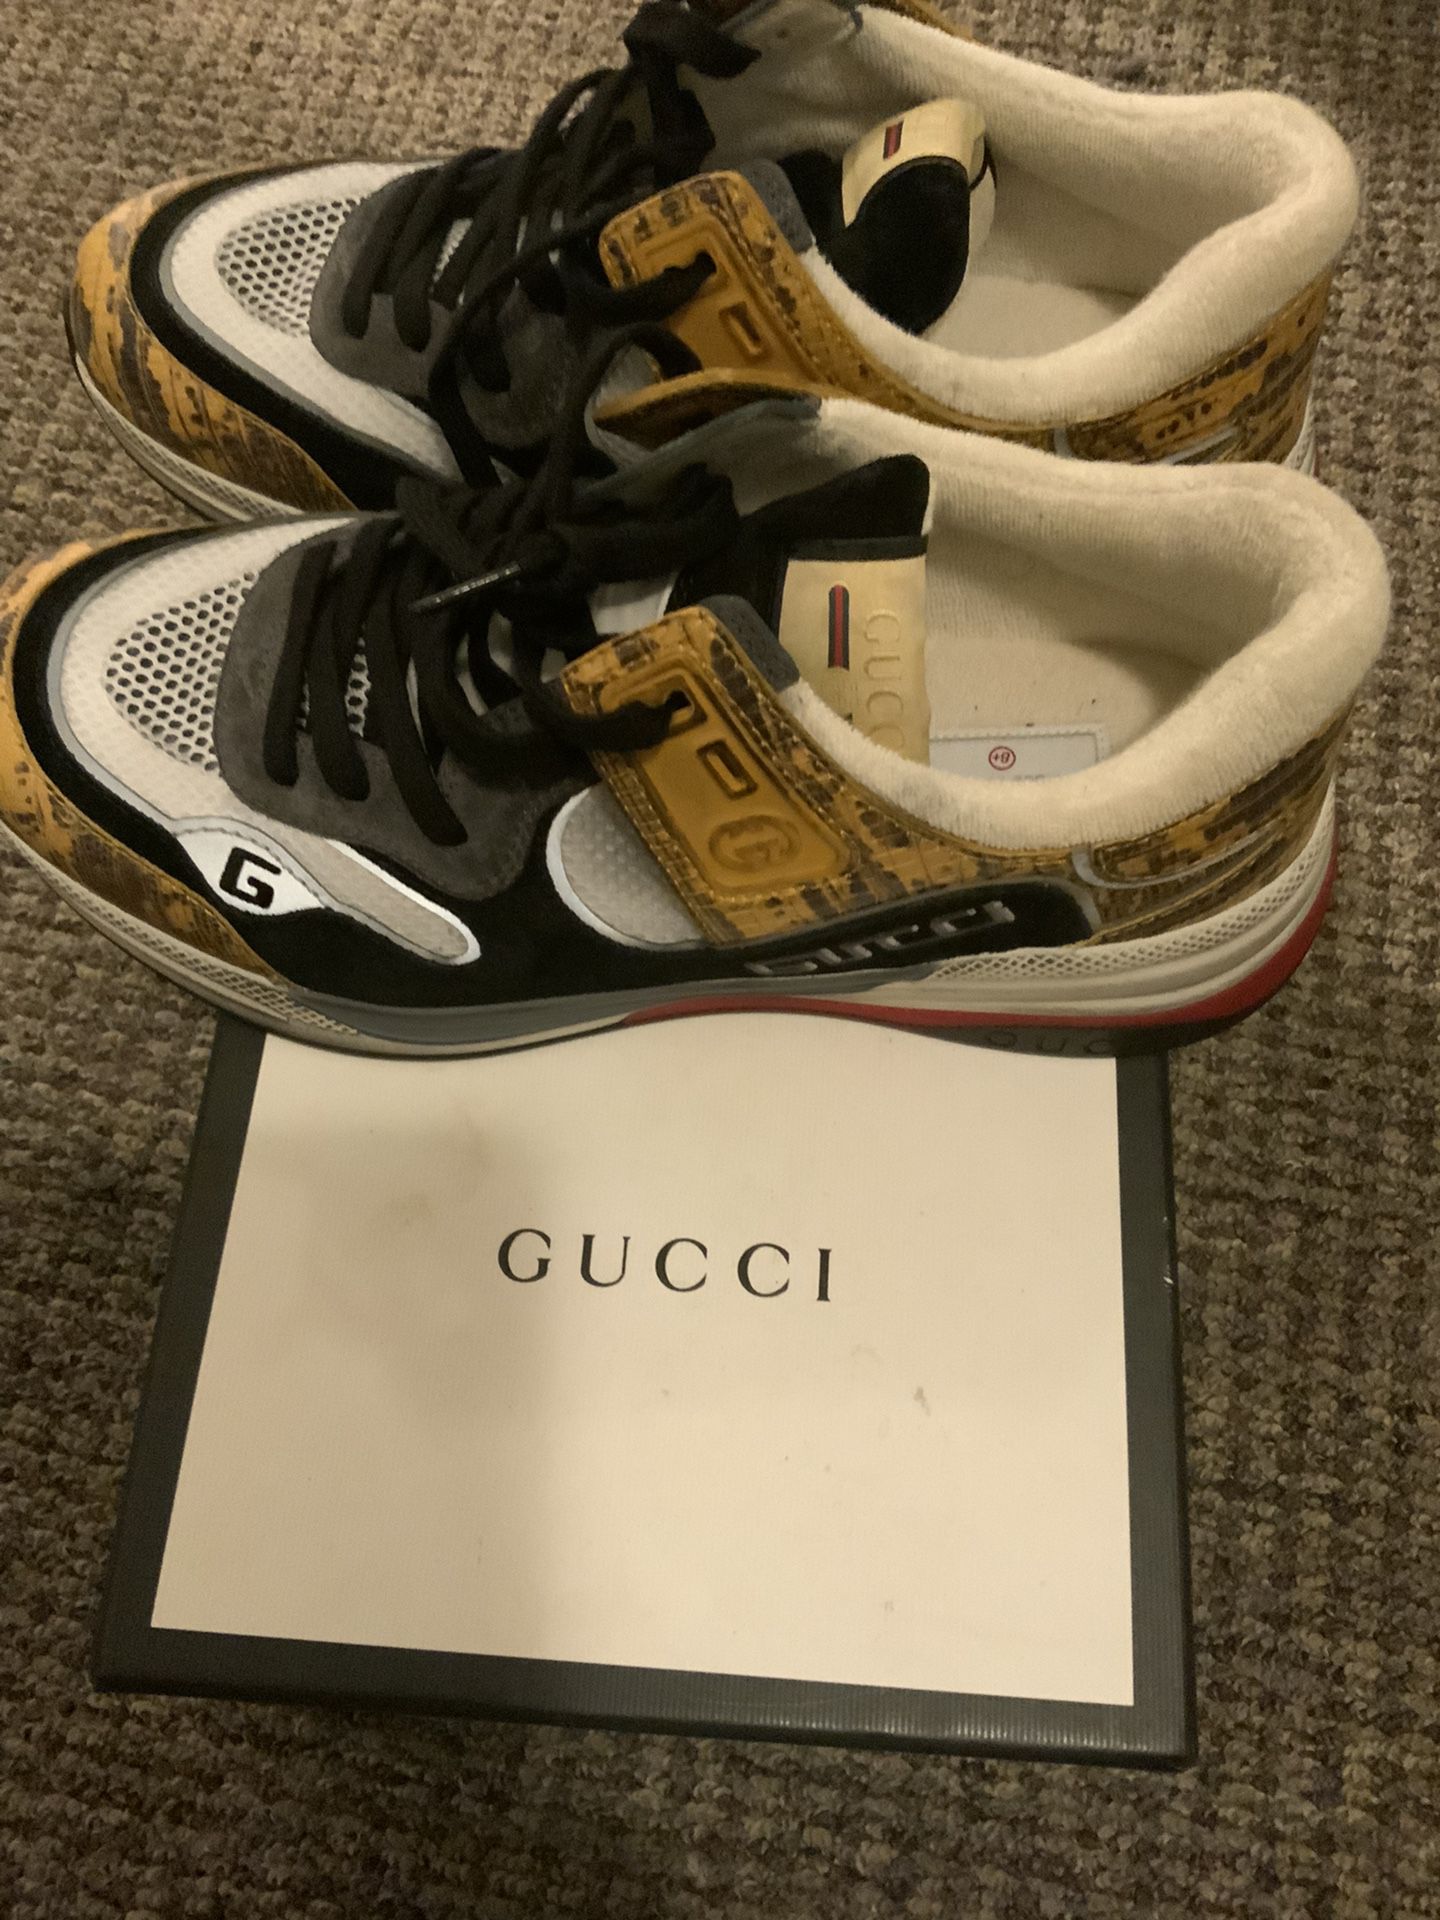 Gucci  Shoes Sneakers For Men Size 8 1/2 New 100% authentic Retails 800$ Plus Tax